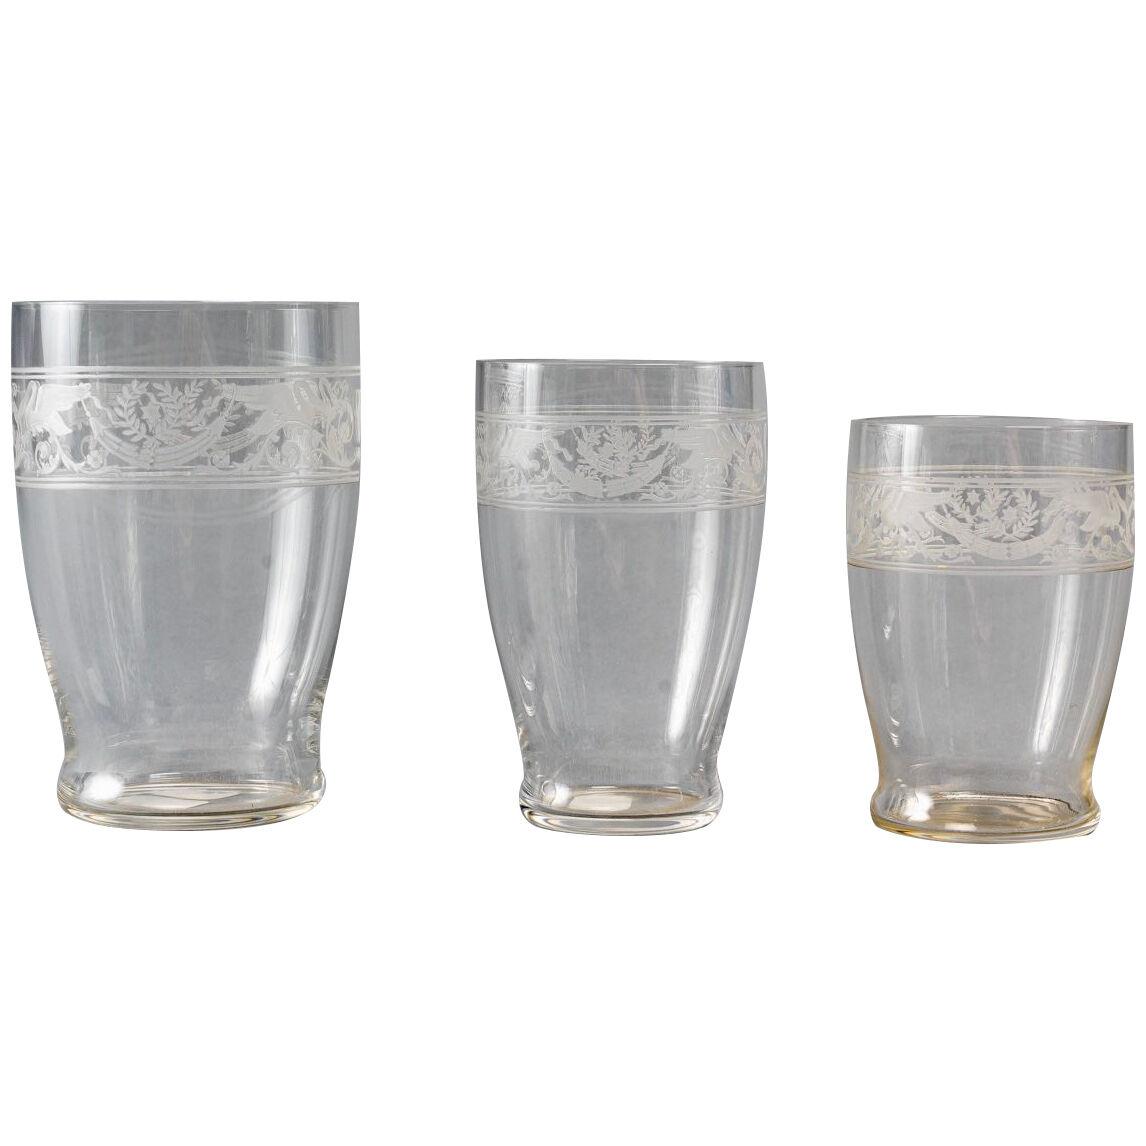 Baccarat - Tumblers Glasses Set Swans Crystal - 32 Pieces